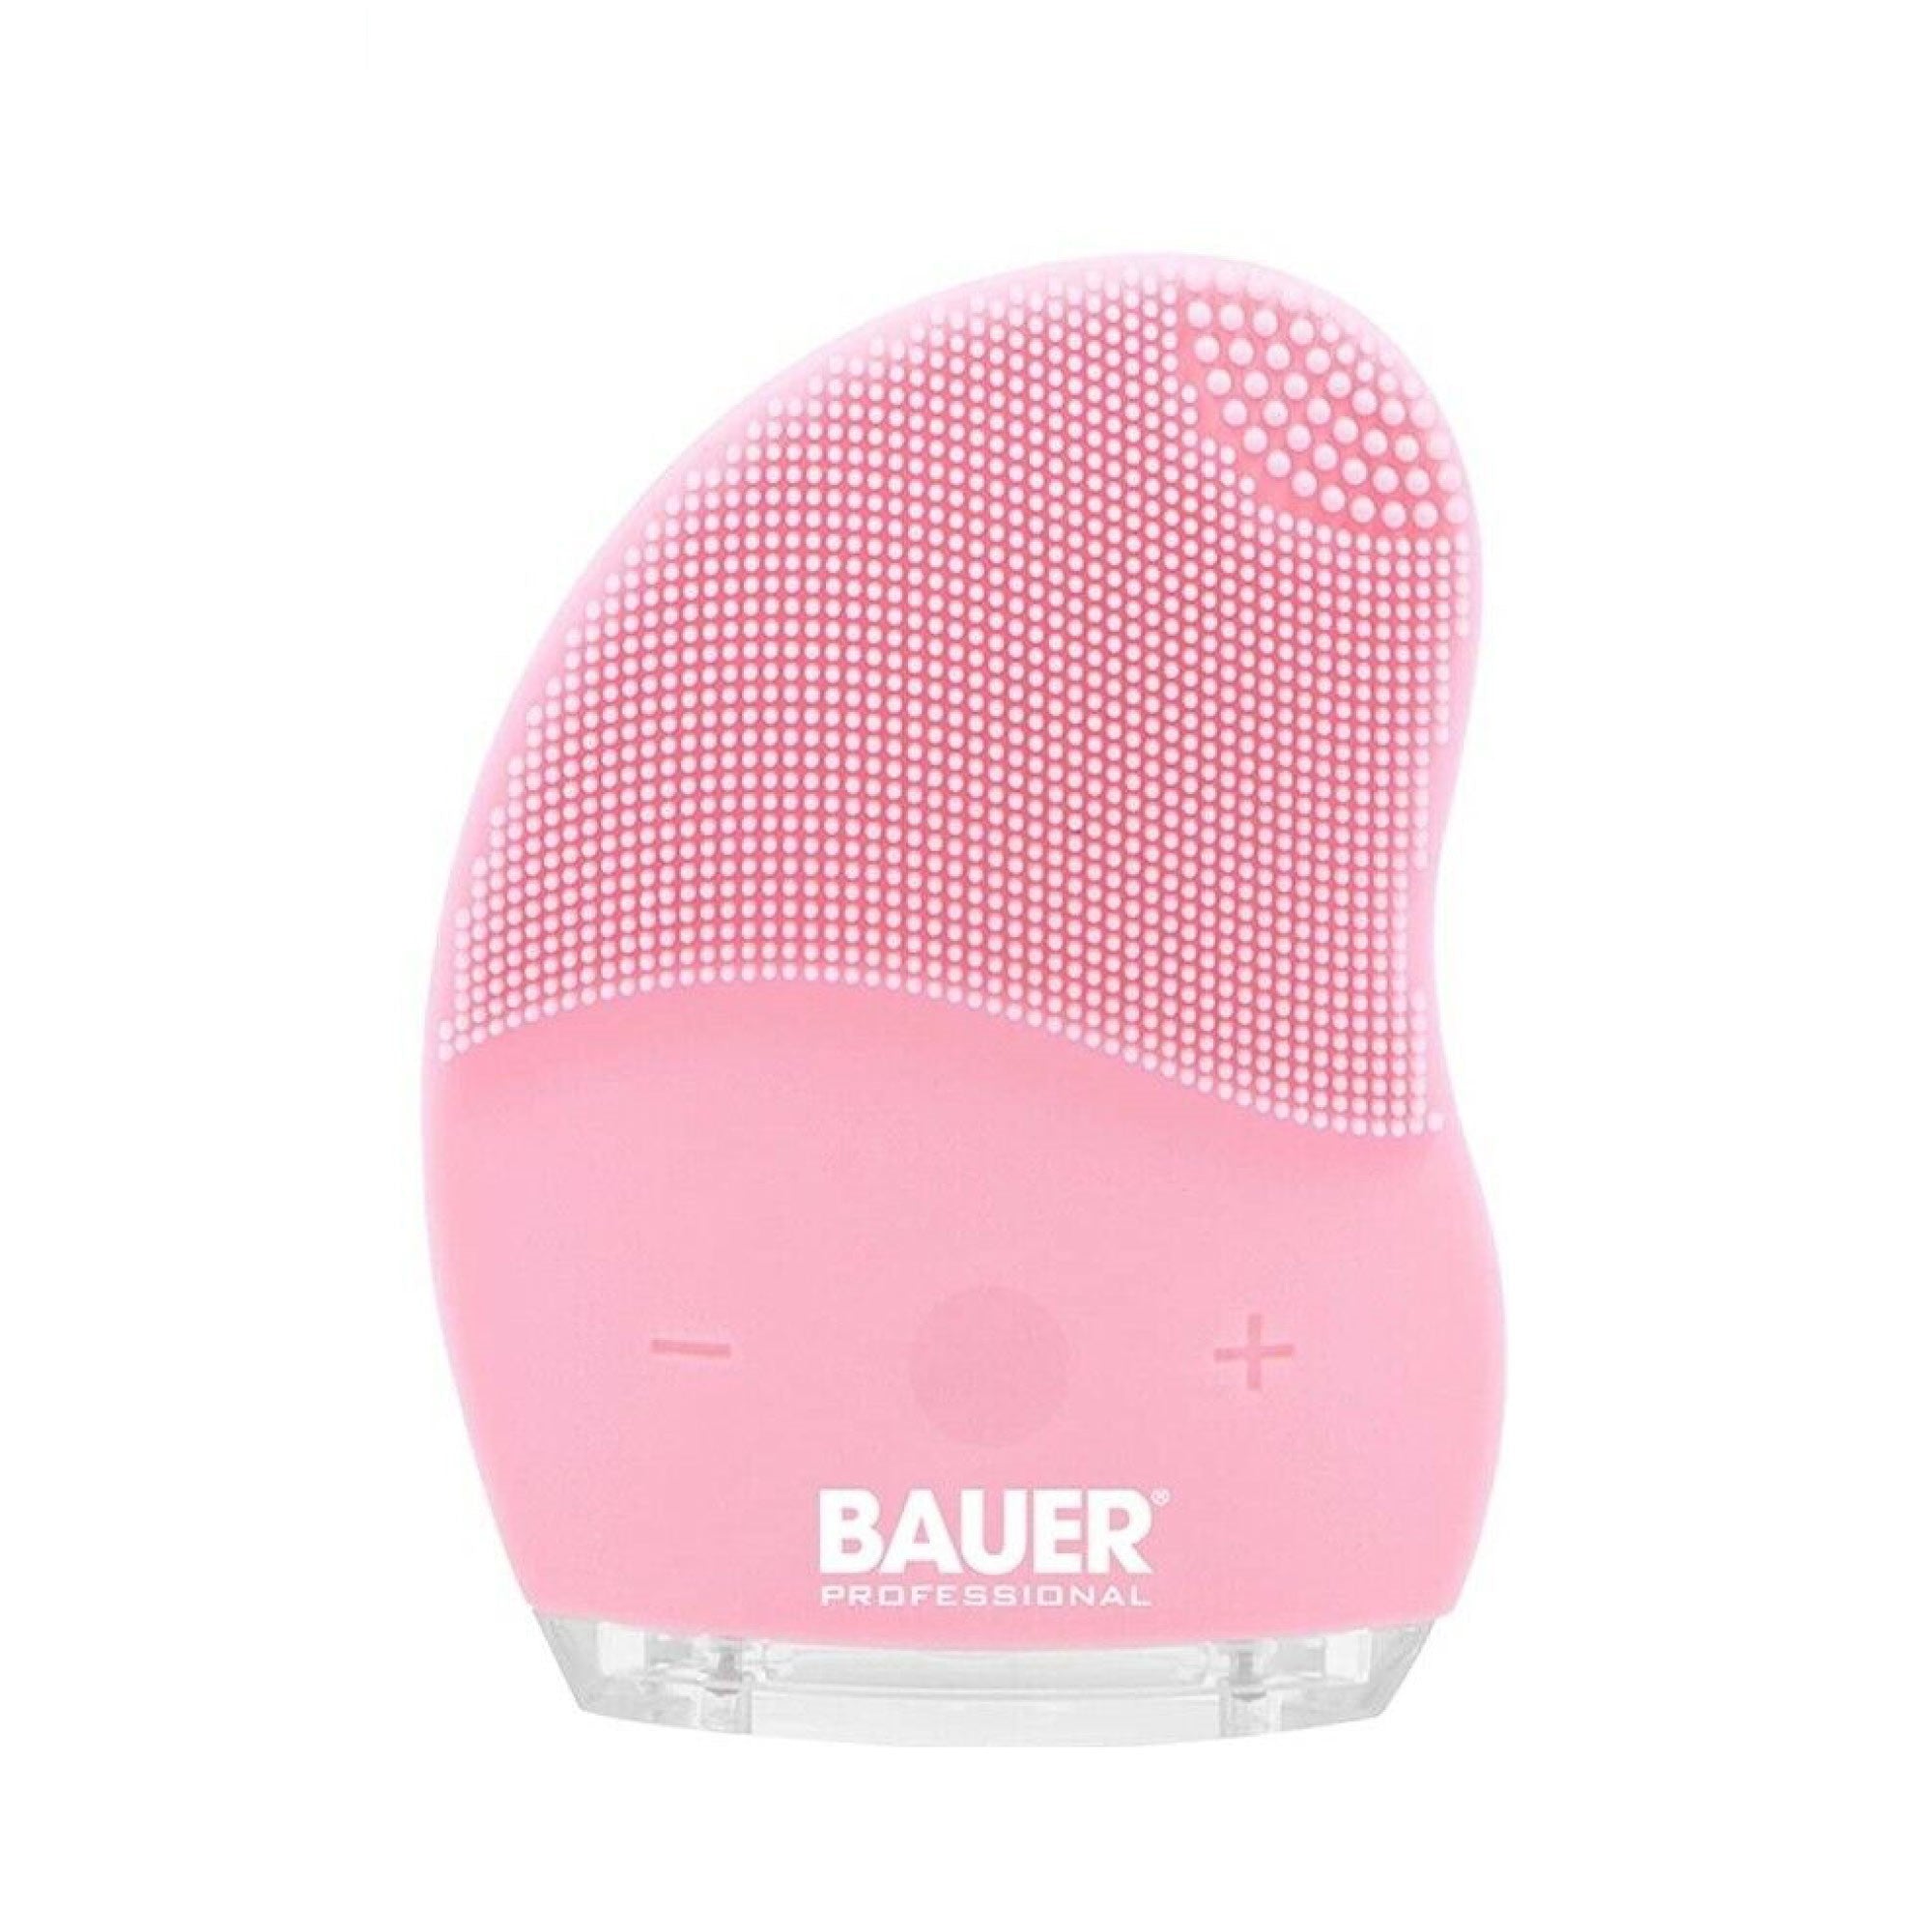 Bauer Silicone Facial Cleansing Brush  | TJ Hughes